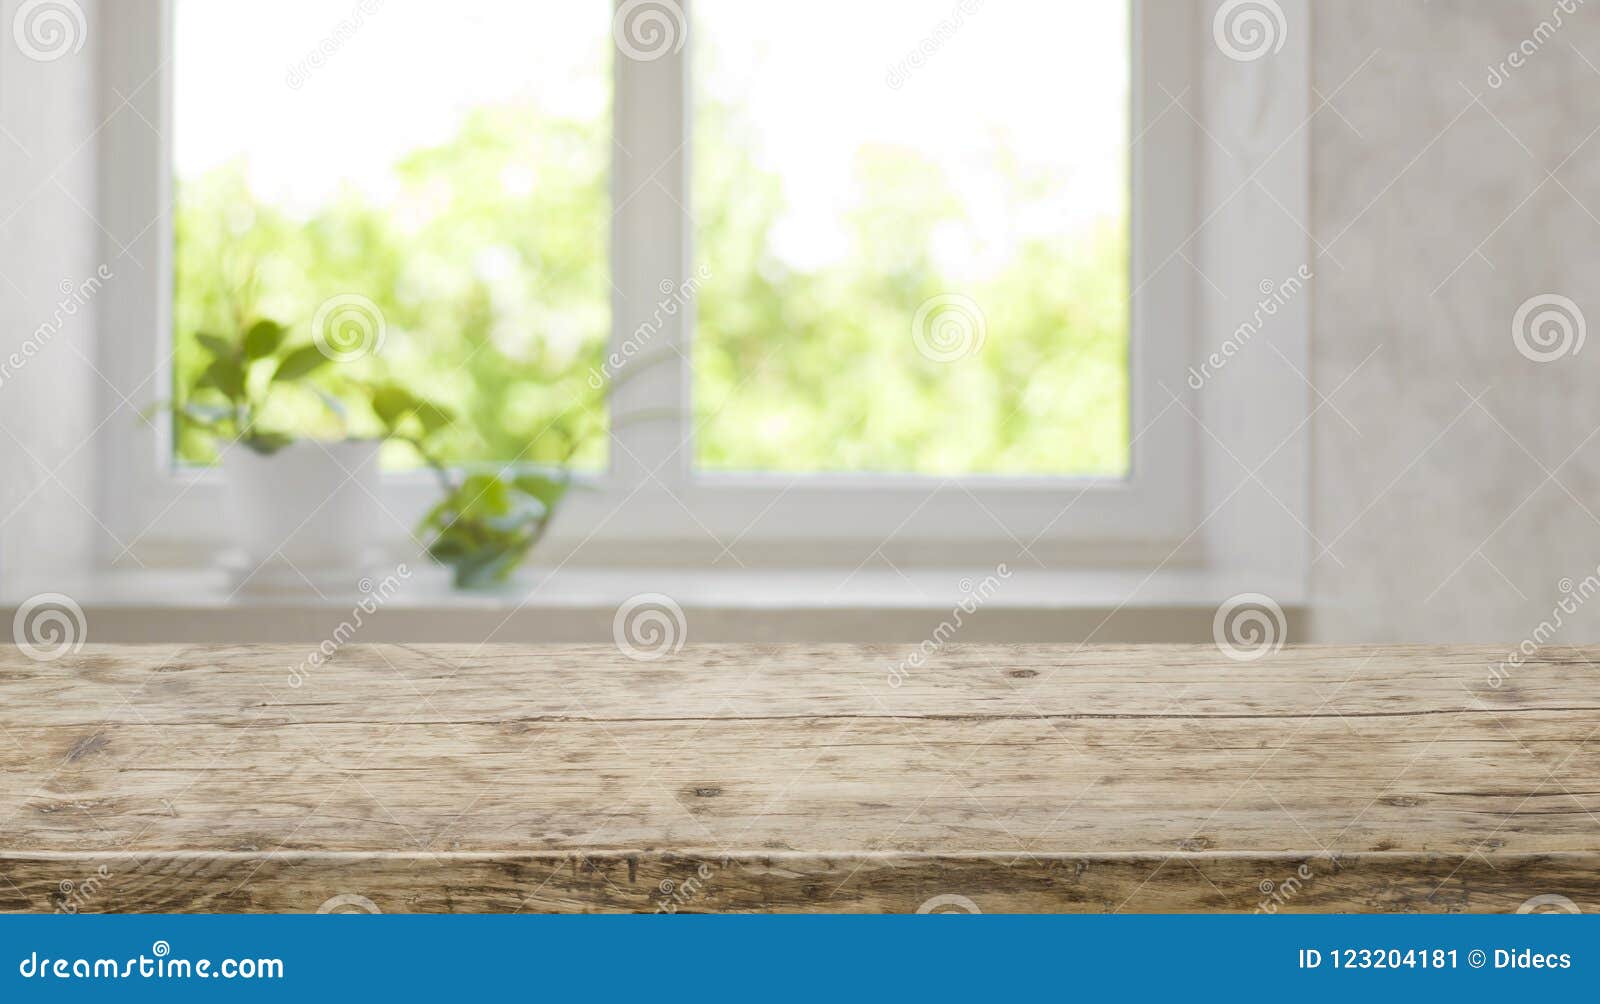 brown aged wooden tabletop with blurred window for product display